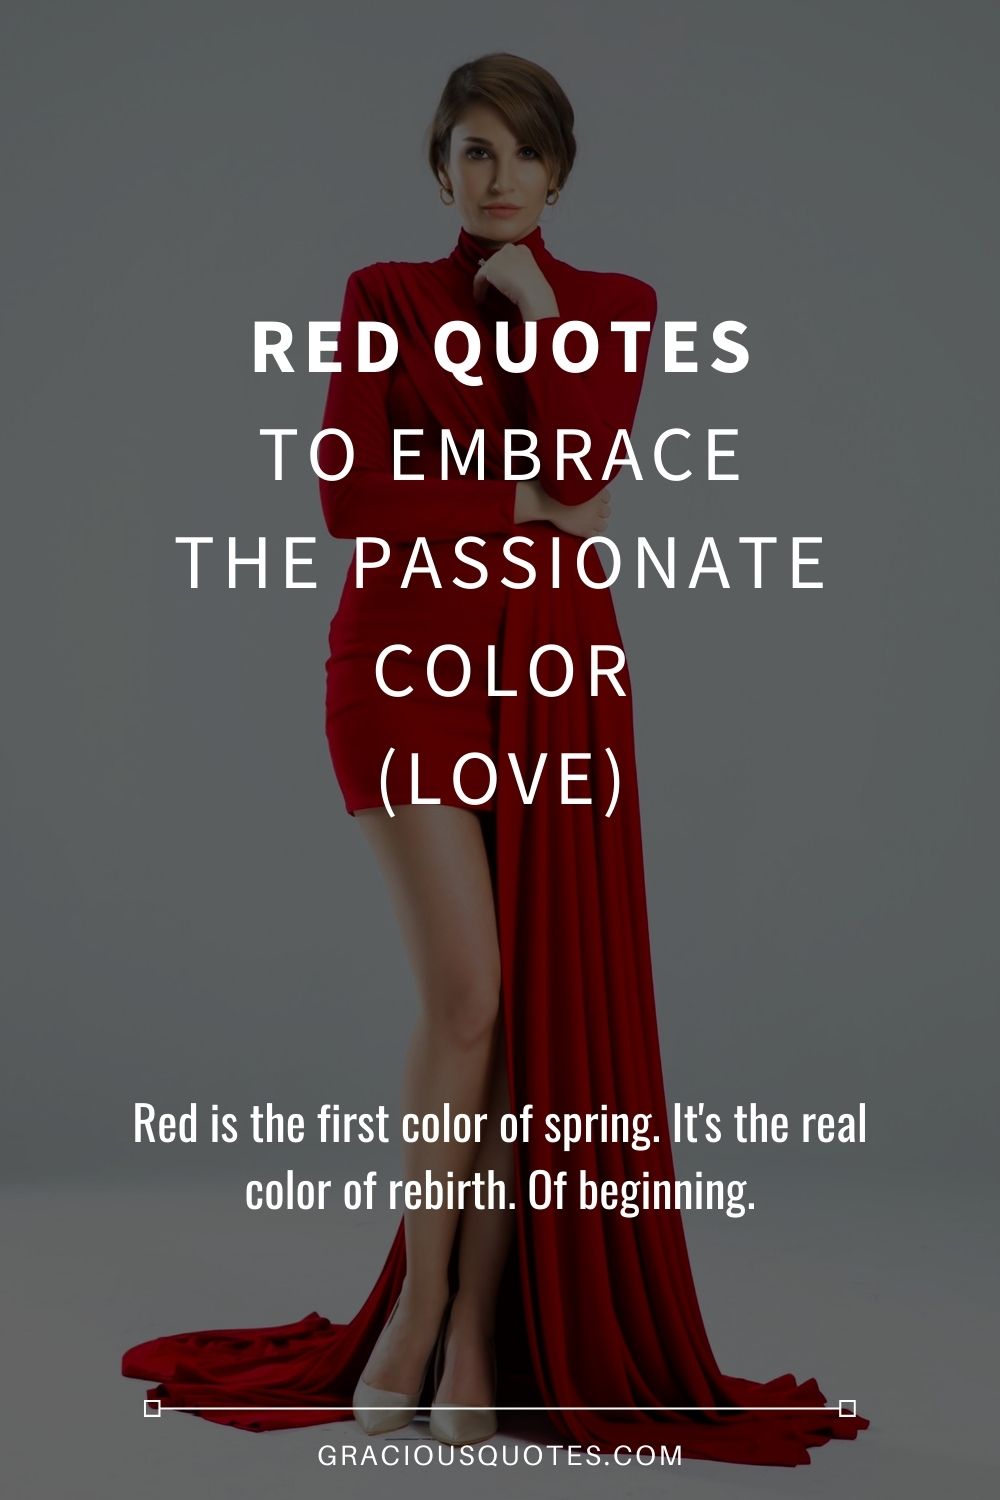 announcer Med andre band Gummi 48 Red Quotes to Embrace the Passionate Color (LOVE)